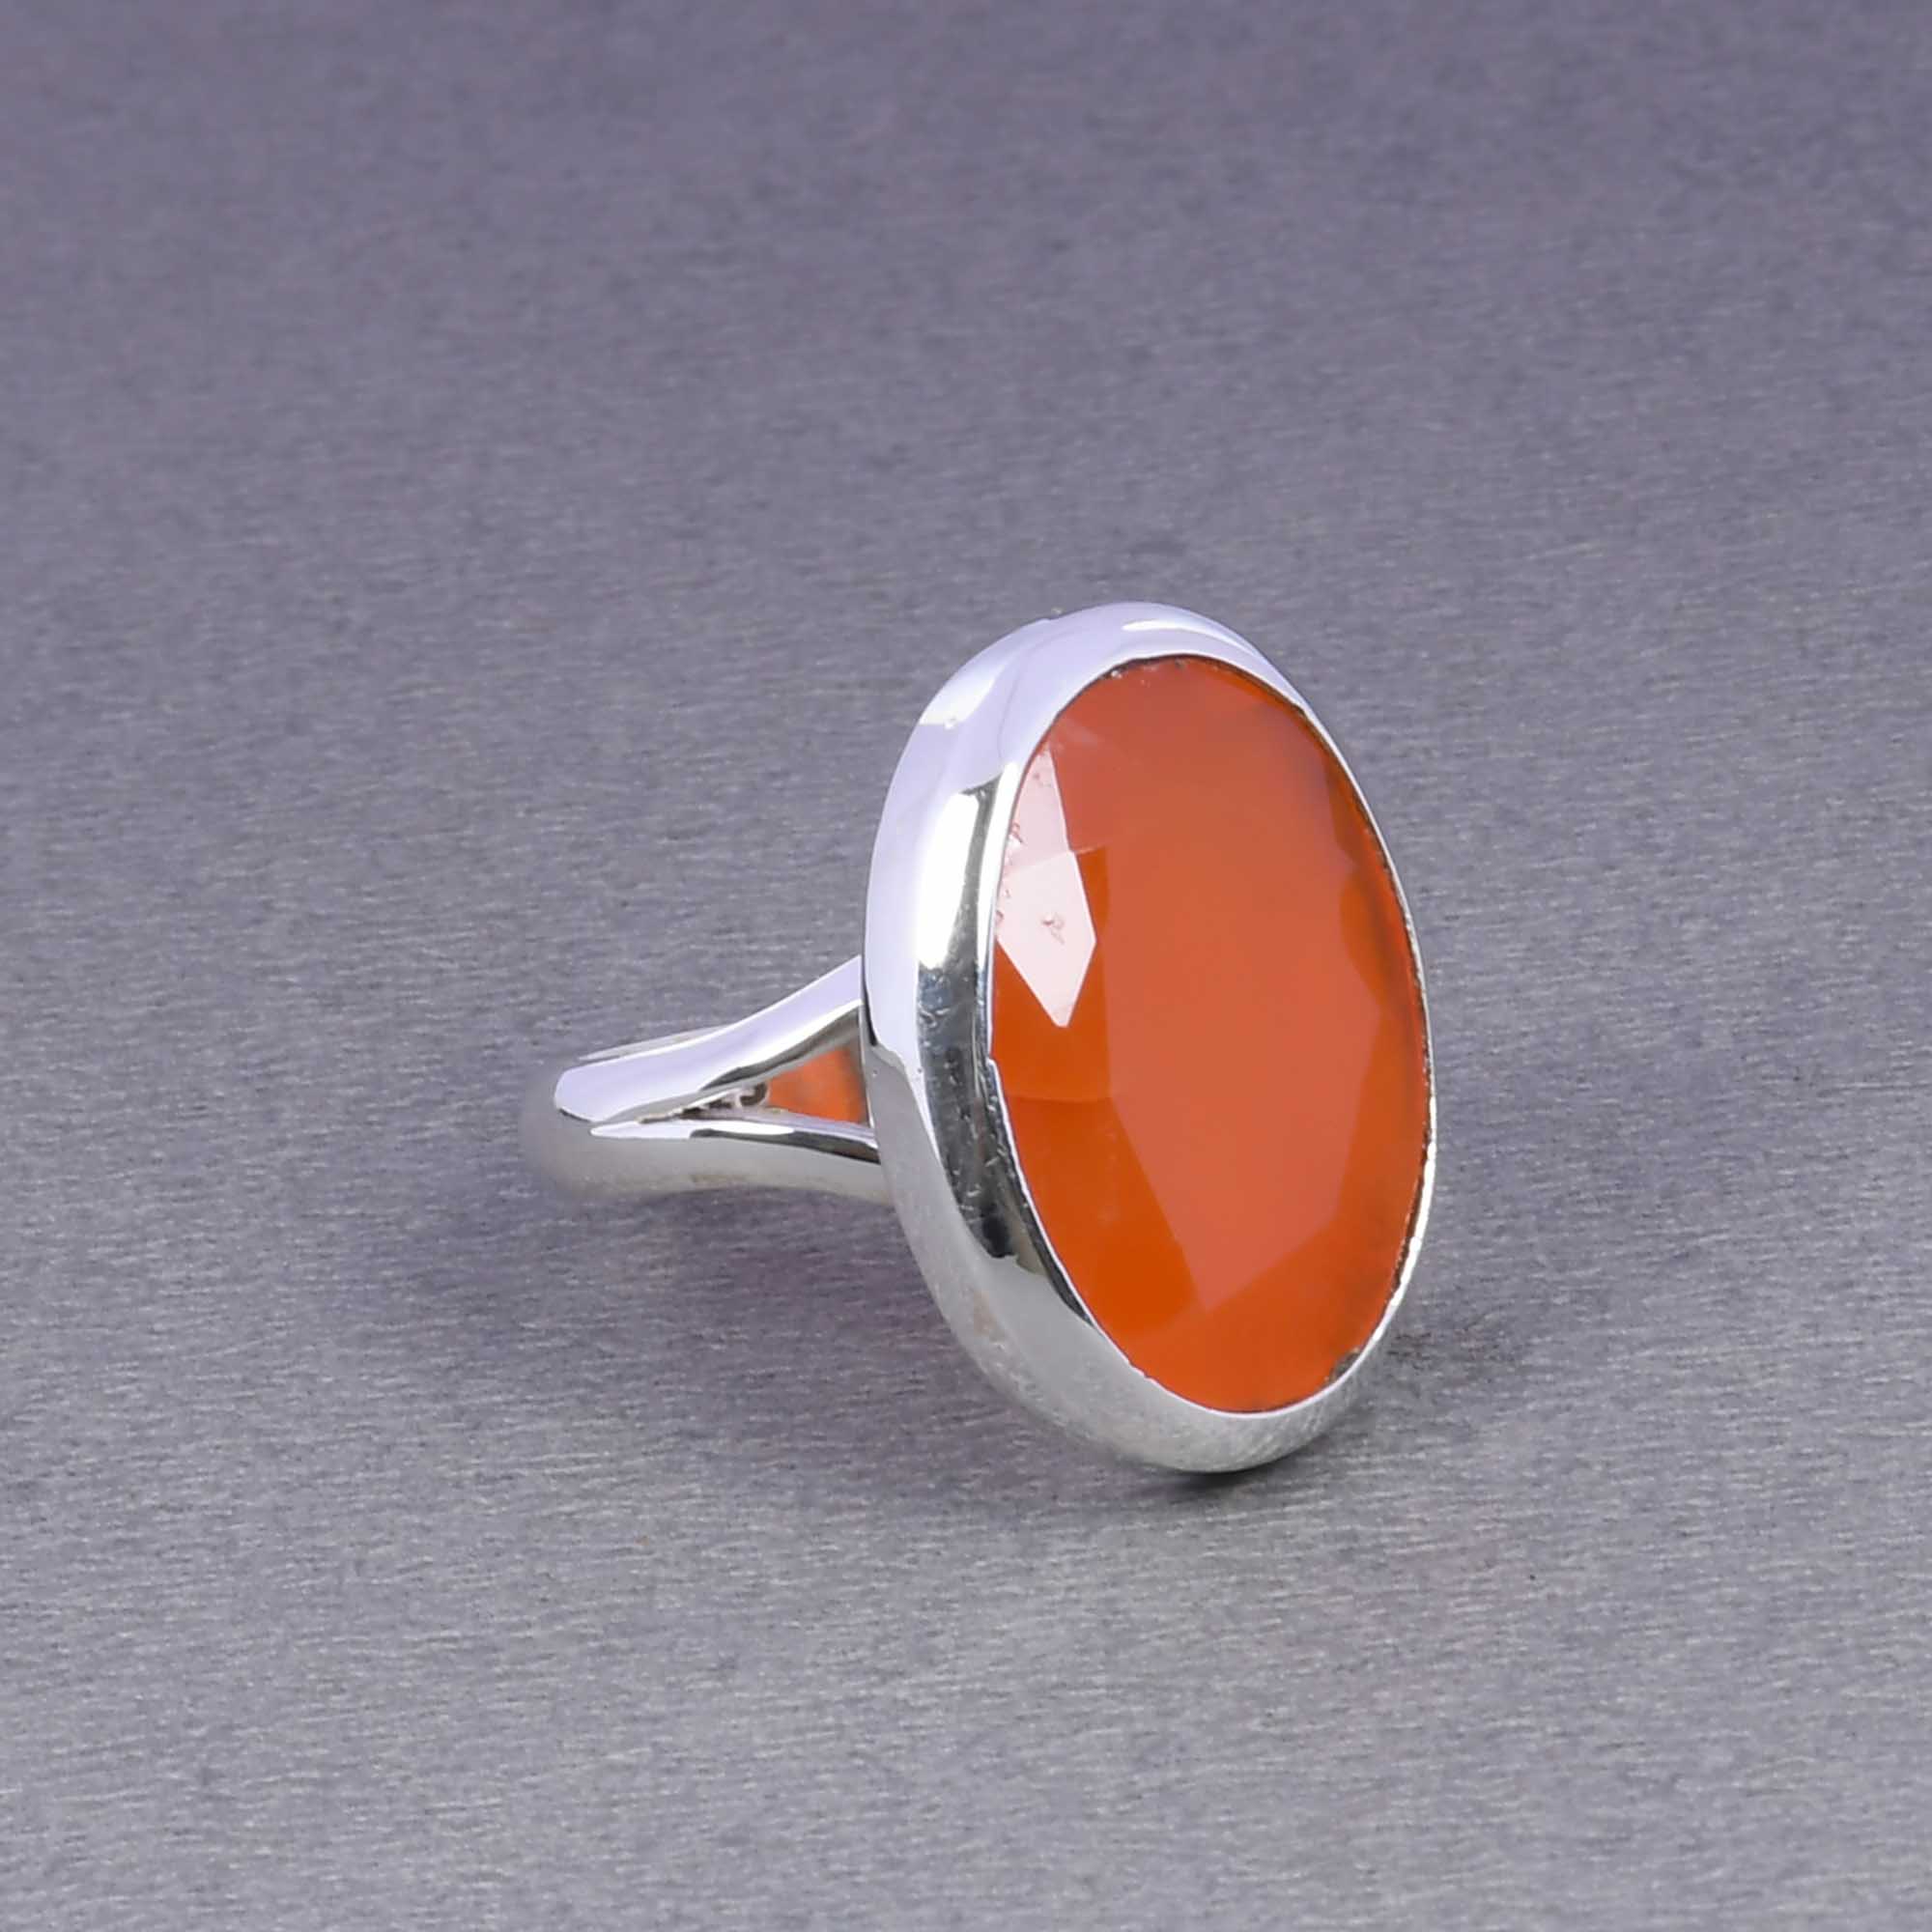 gomed stone ring 15.00 Carat 16.25 ratti Certified AA++ Natural Gemstone  Gomed Hessonite Stone ring